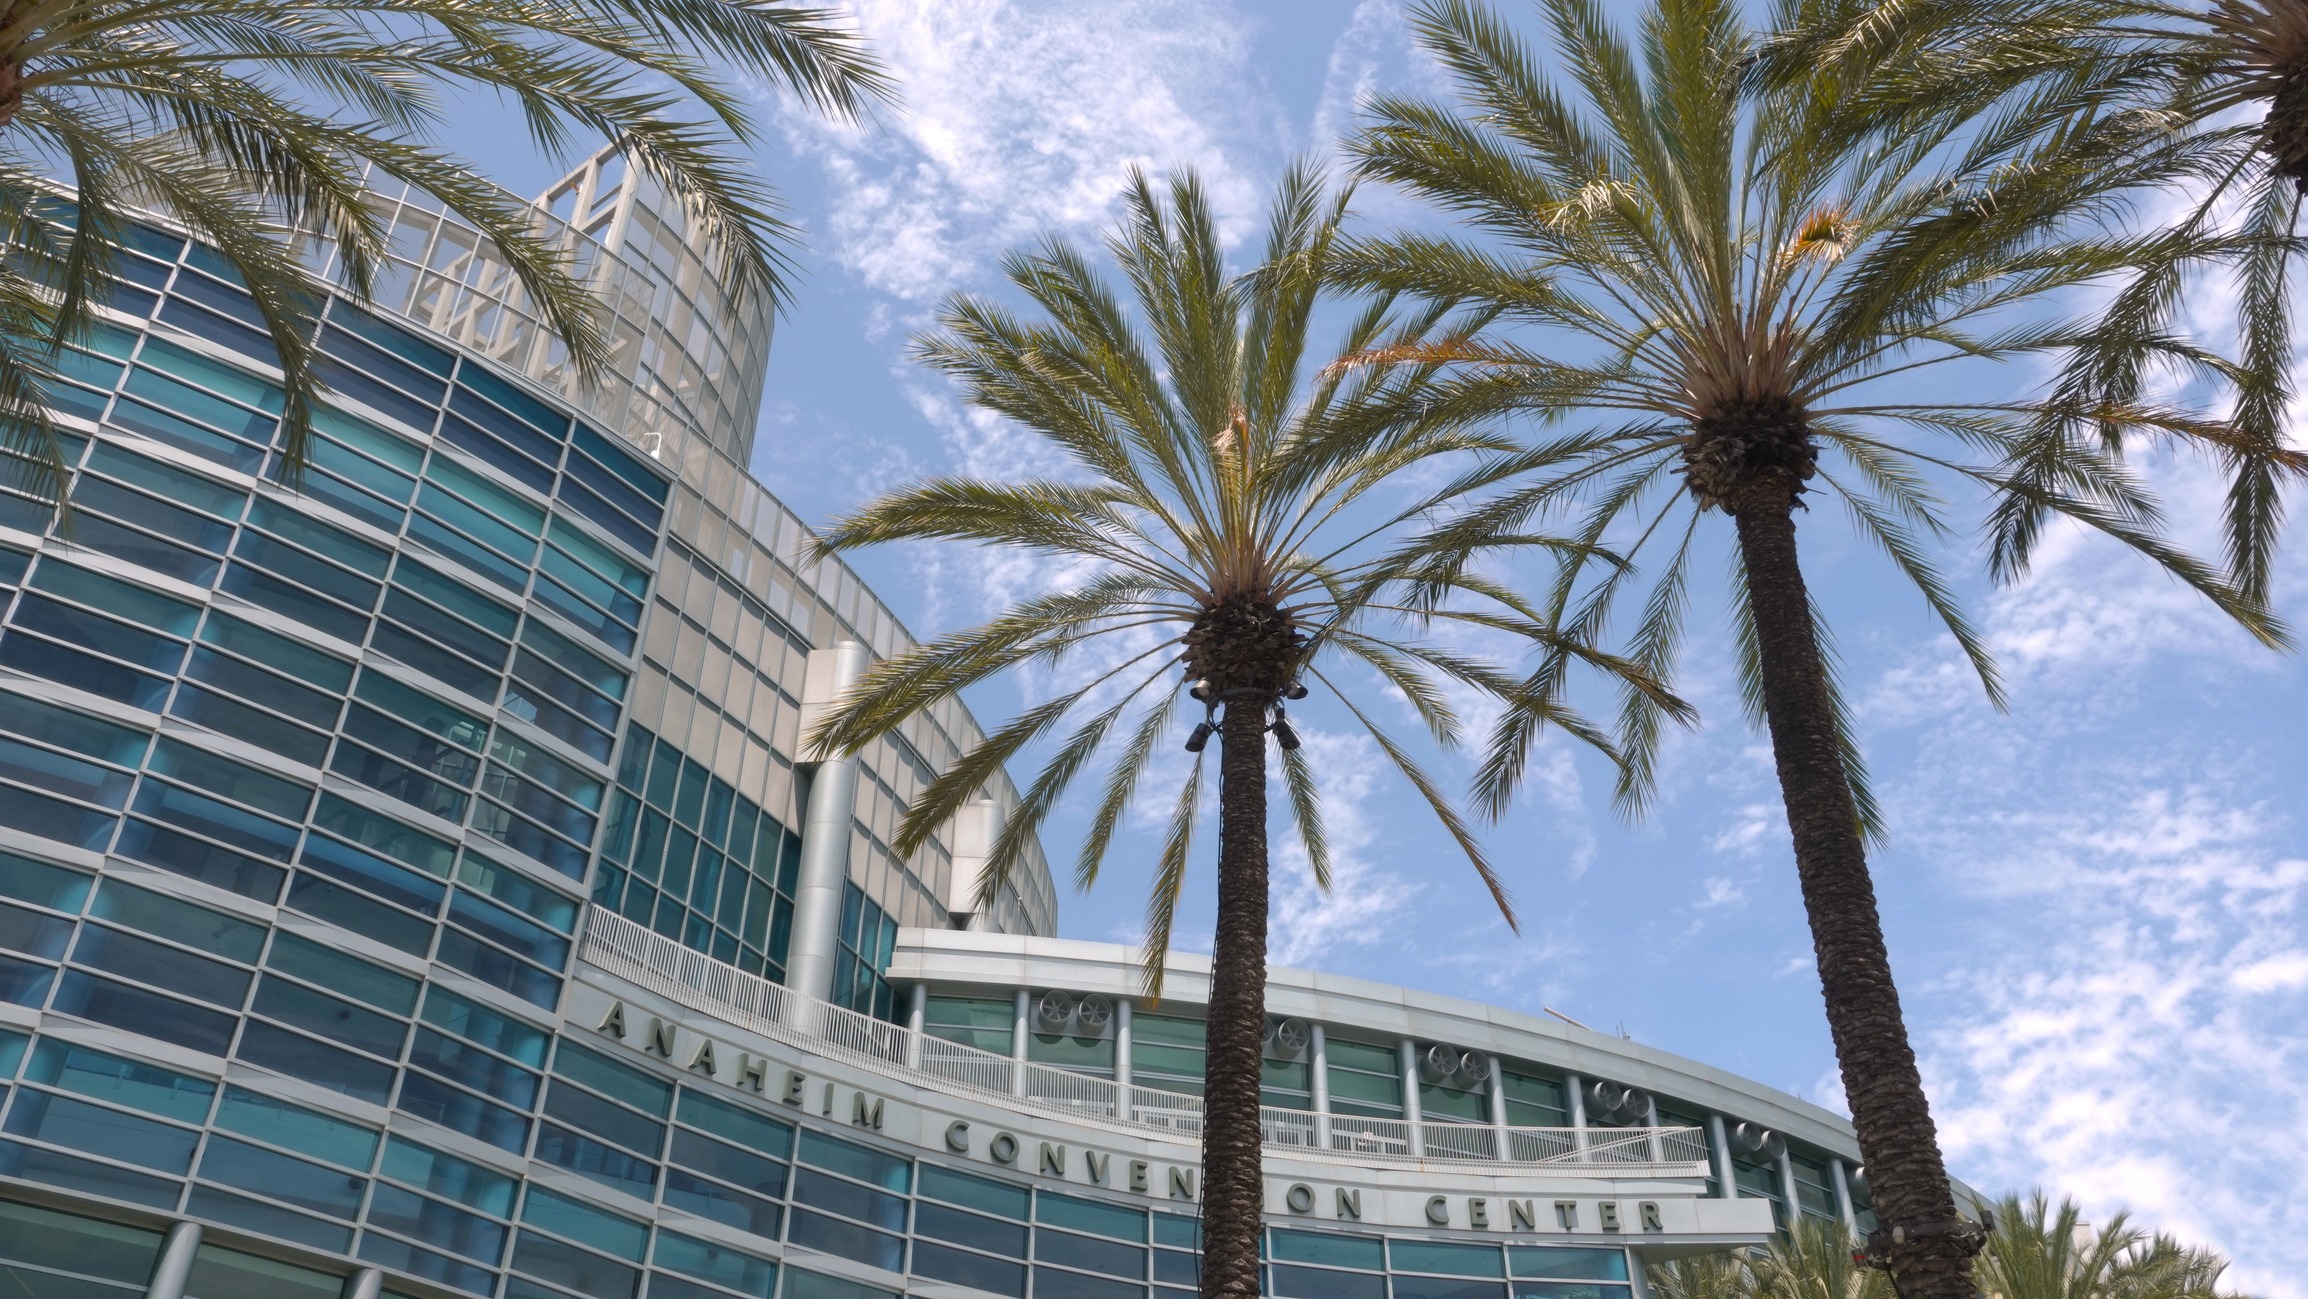 An exterior shot of Anaheim Convention Center in California with palm trees in front.